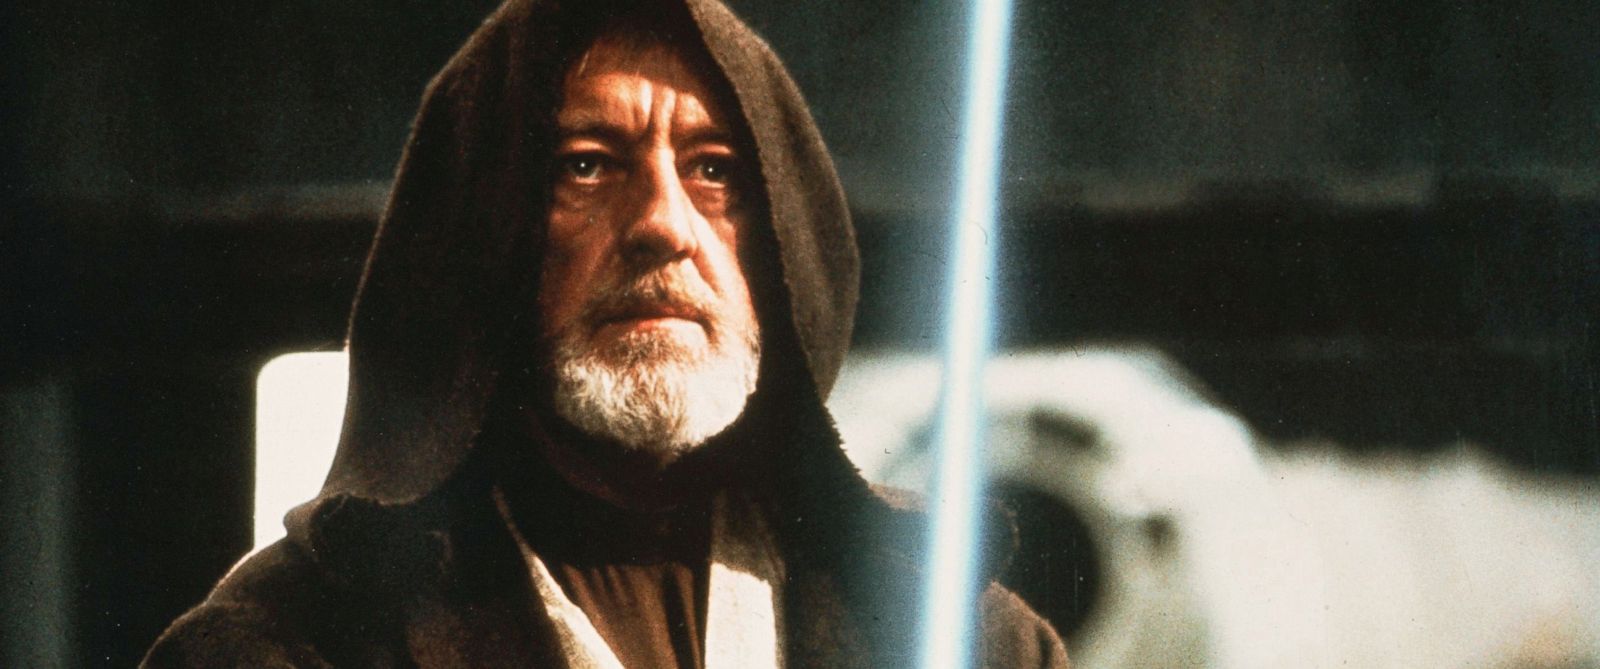 ‘Star Wars’ Day: May the 4th Be With You